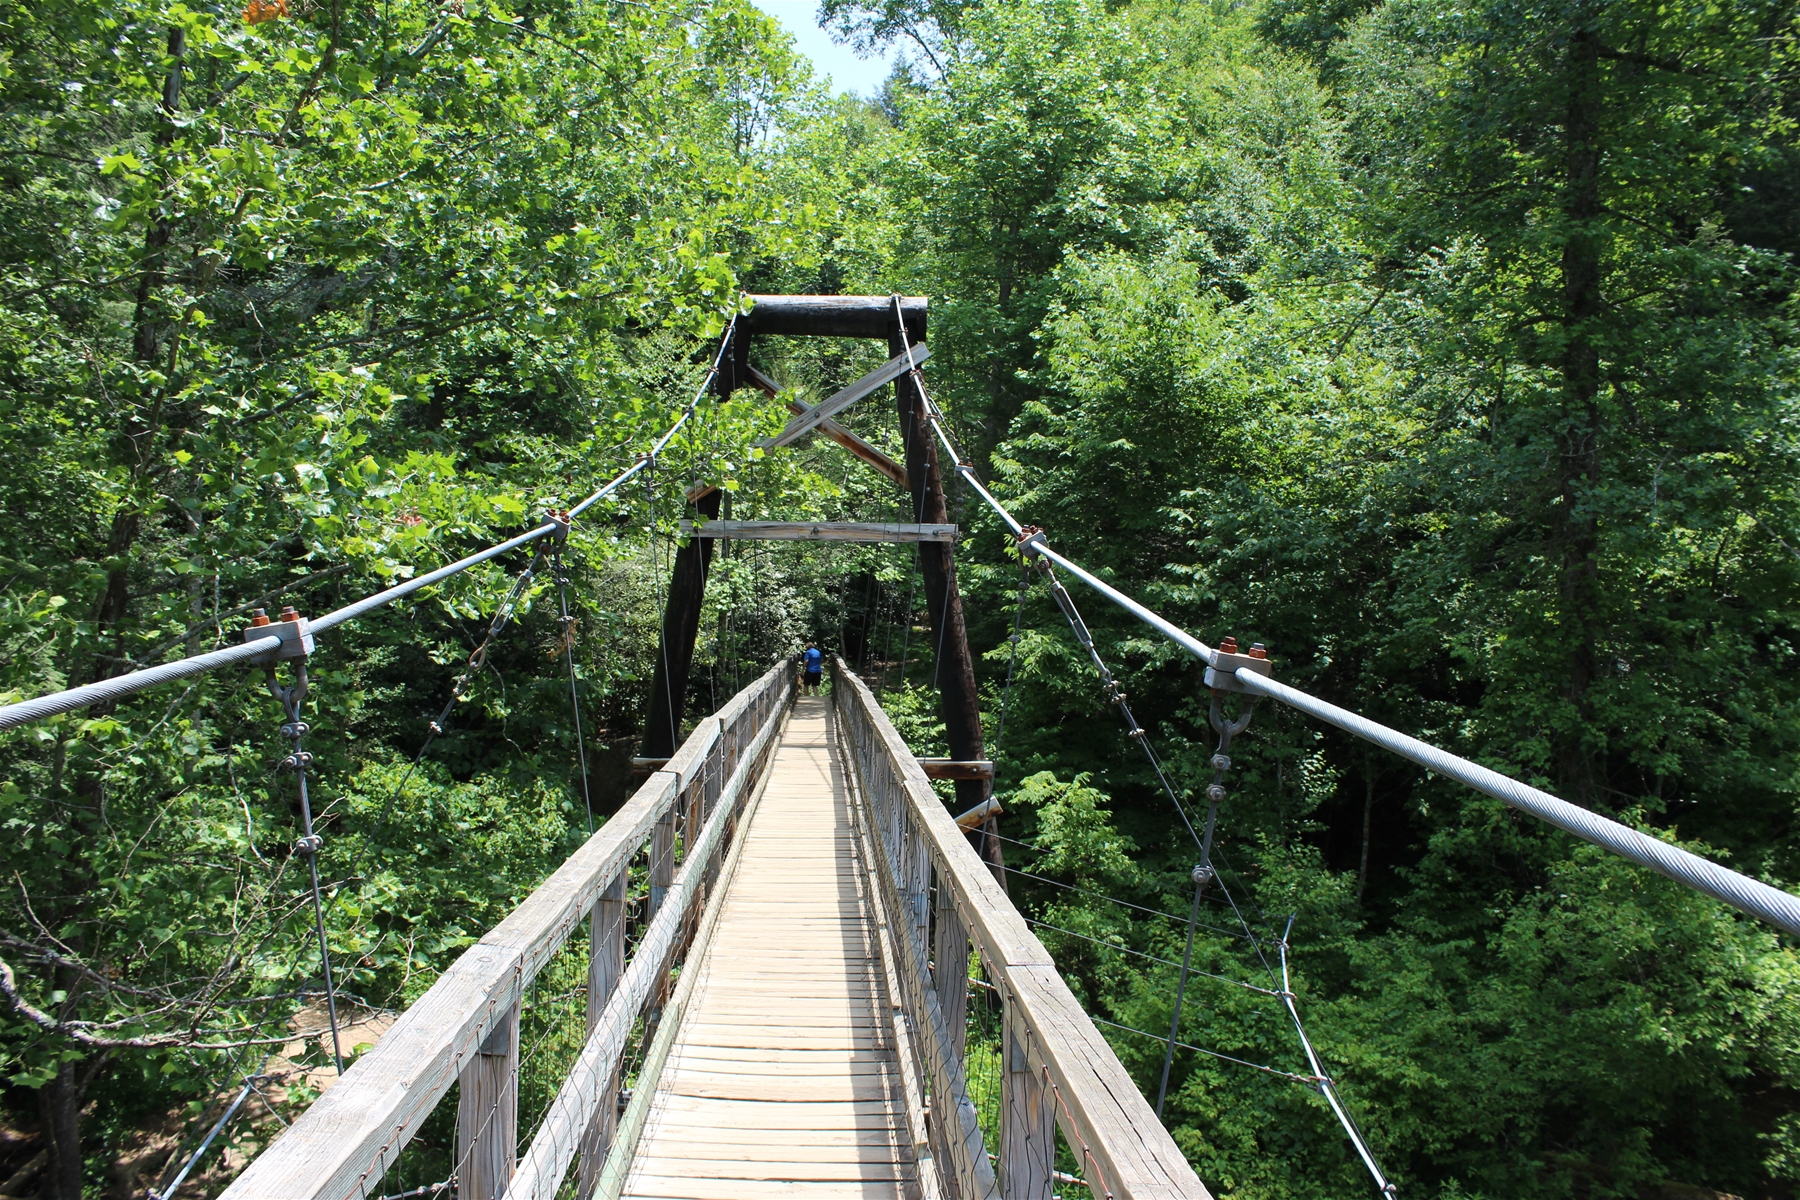 Person crossing the Toccoa River on the Swinging Bridge